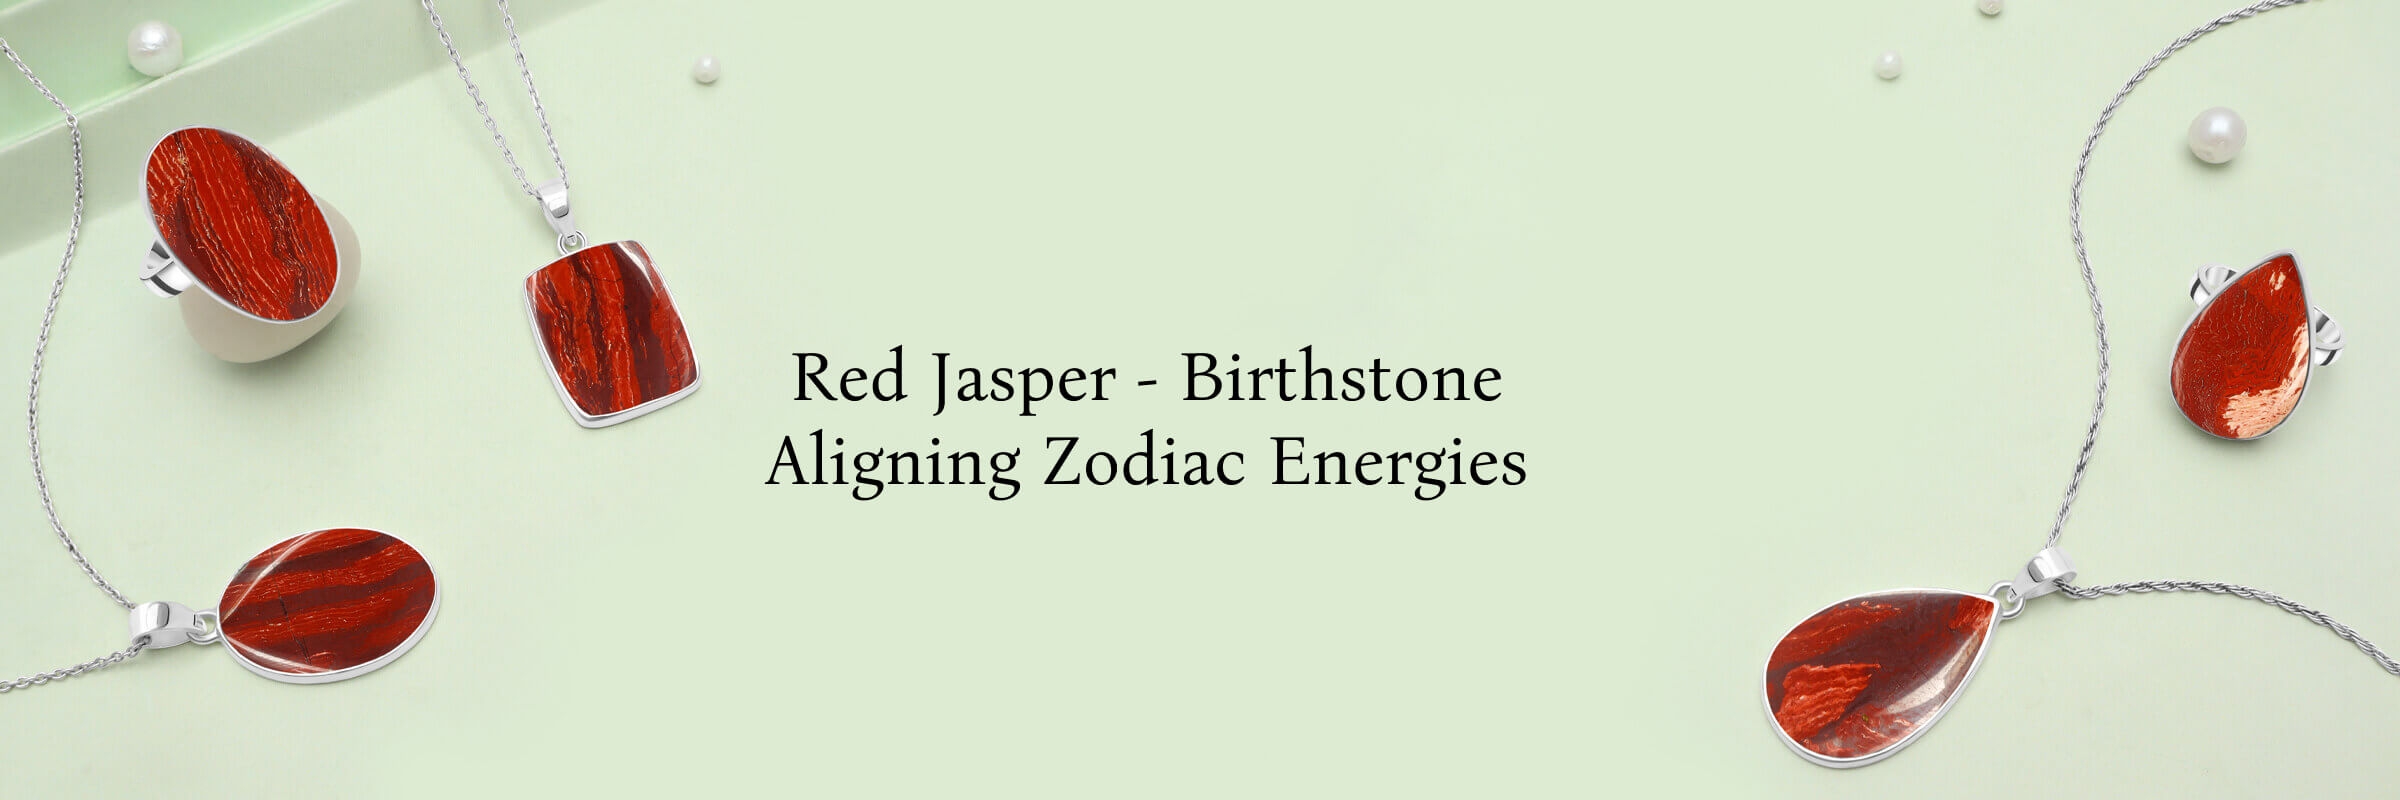 Red Jasper is The Birthstone of Which Zodiac Sign